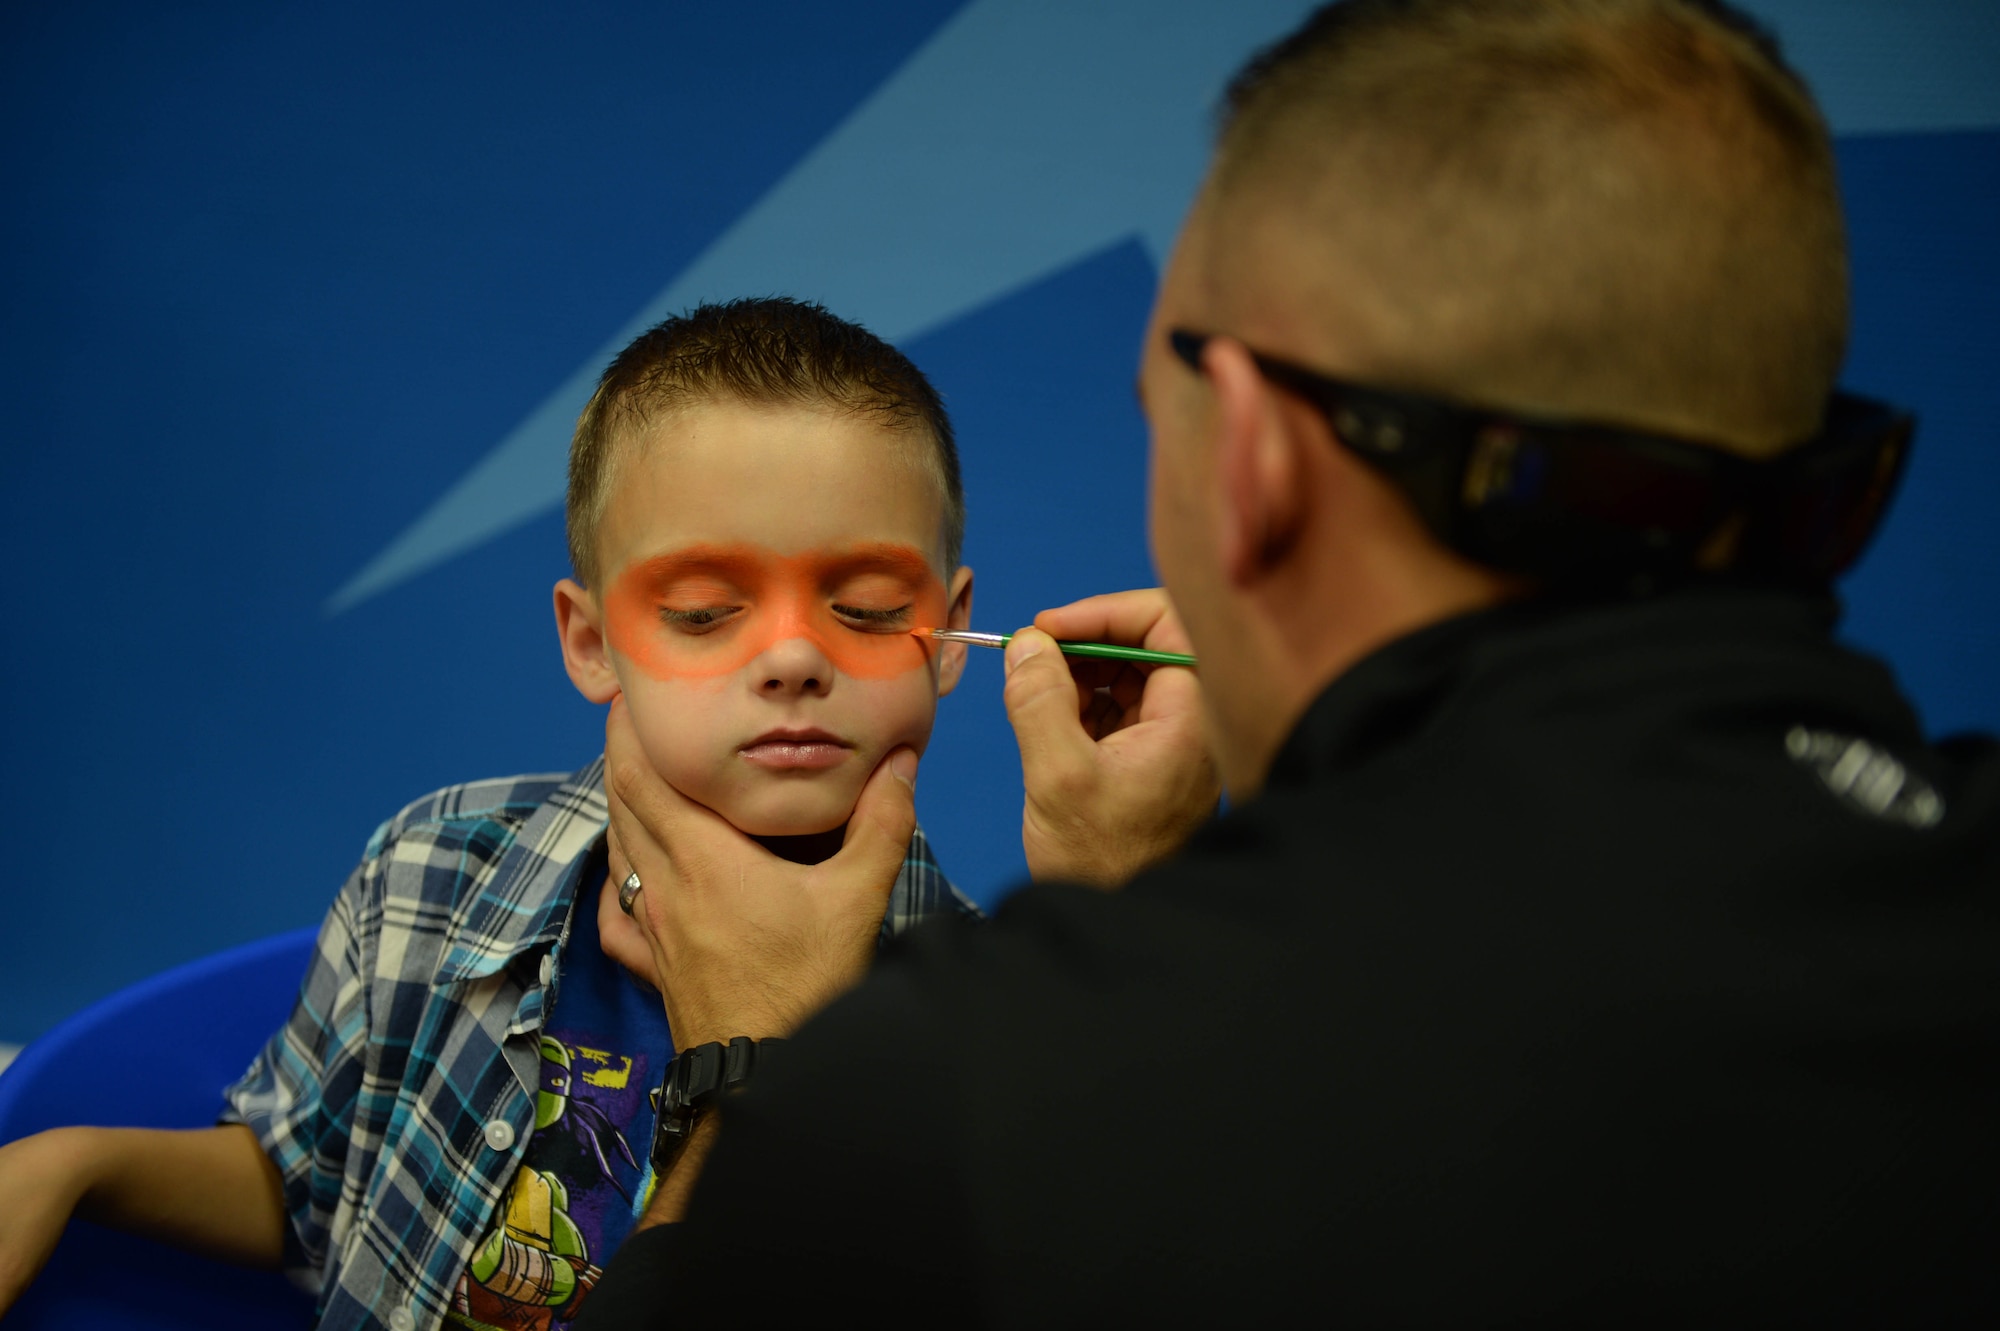 U.S. Air Force Airman 1st Class Ryan Macri, a 606th Air Control Squadron radio frequency transmission journeyman, paints a mask on his son Zachary during Zachary’s birthday party Sept. 13, 2014, at Spandahlem Air Base, Germany. The Macris celebrated Zachary’s birthday early, so Ryan could attend before leaving on a deployment. (U.S. Air Force photo by Airman 1st Class Dylan Nuckolls/Released)